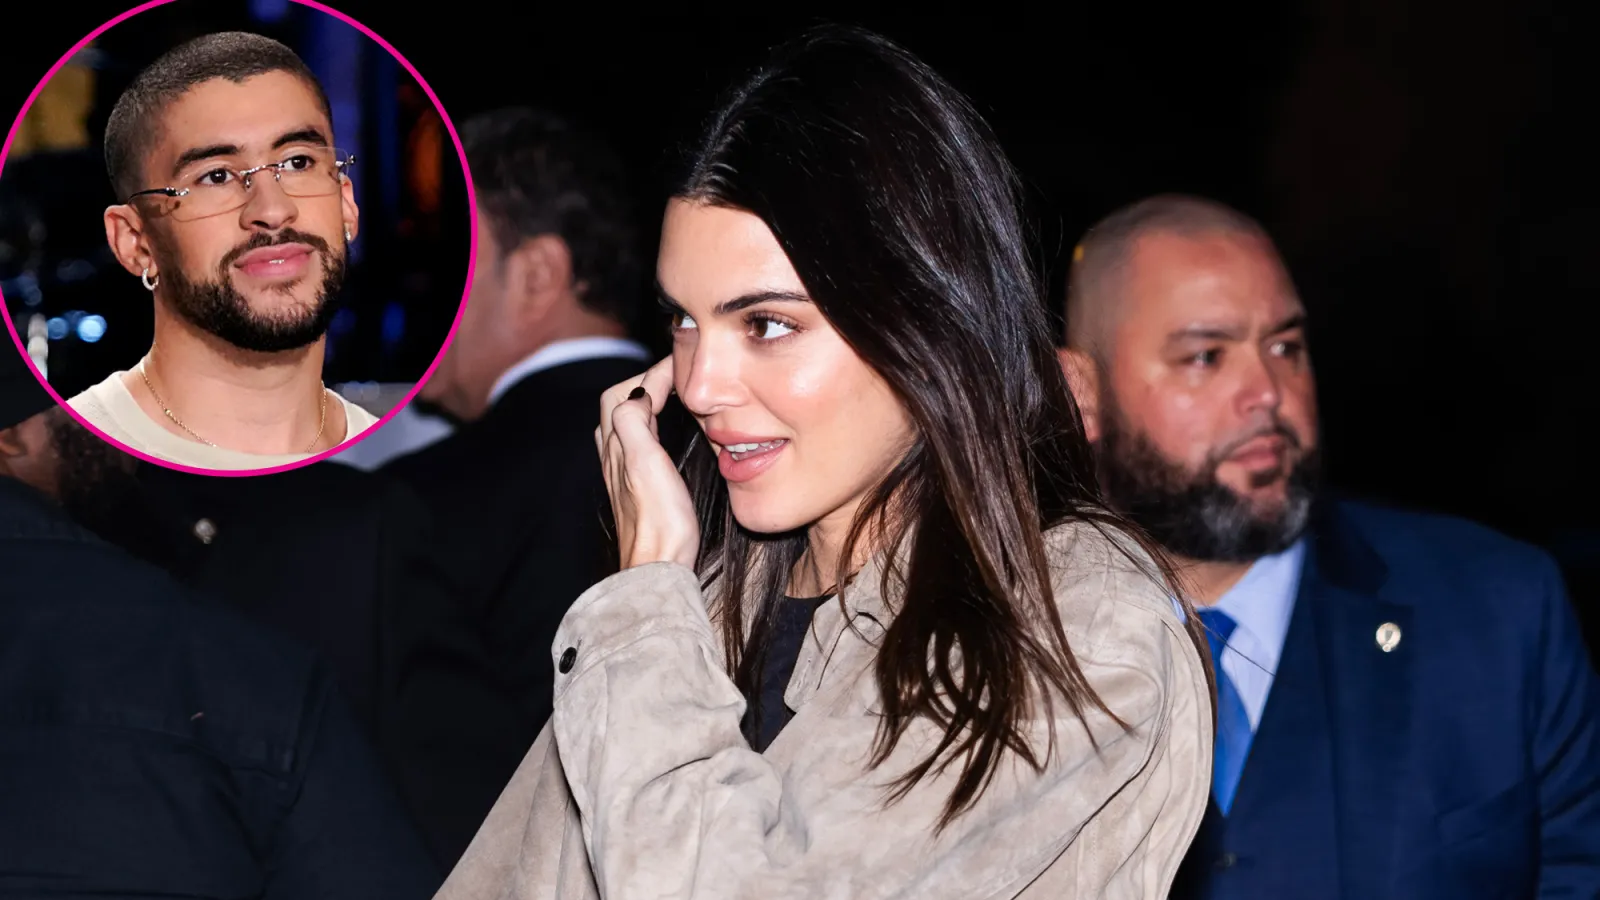 Bad Bunny And Kendall Jenner Attend ‘SNL’ Afterparty With Lady Gaga And Ex-Fiance